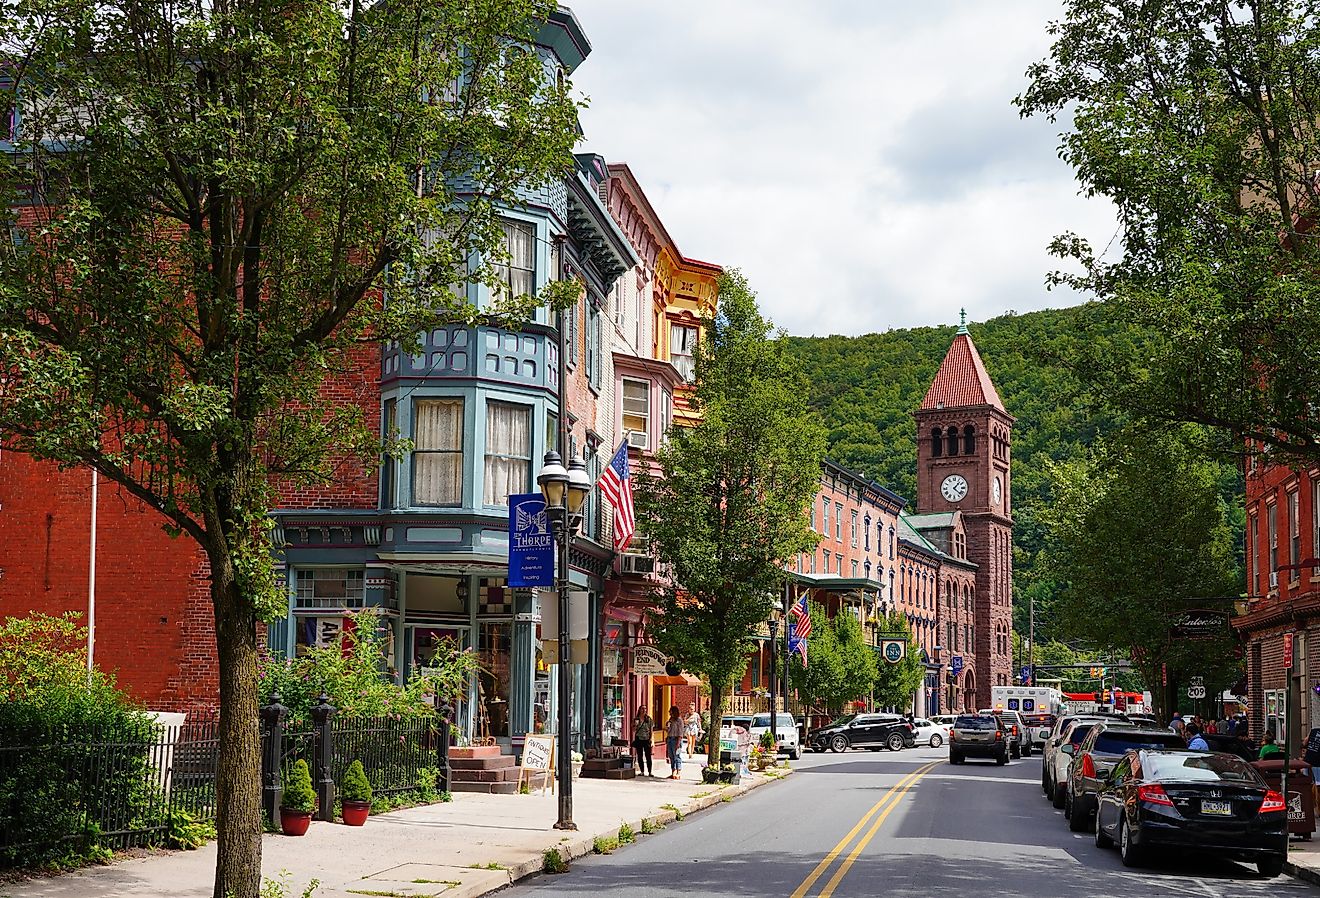 Downtown Jim Thorpe, Pennsylvania, in the summer. Image credit EQRoy via Shutterstock